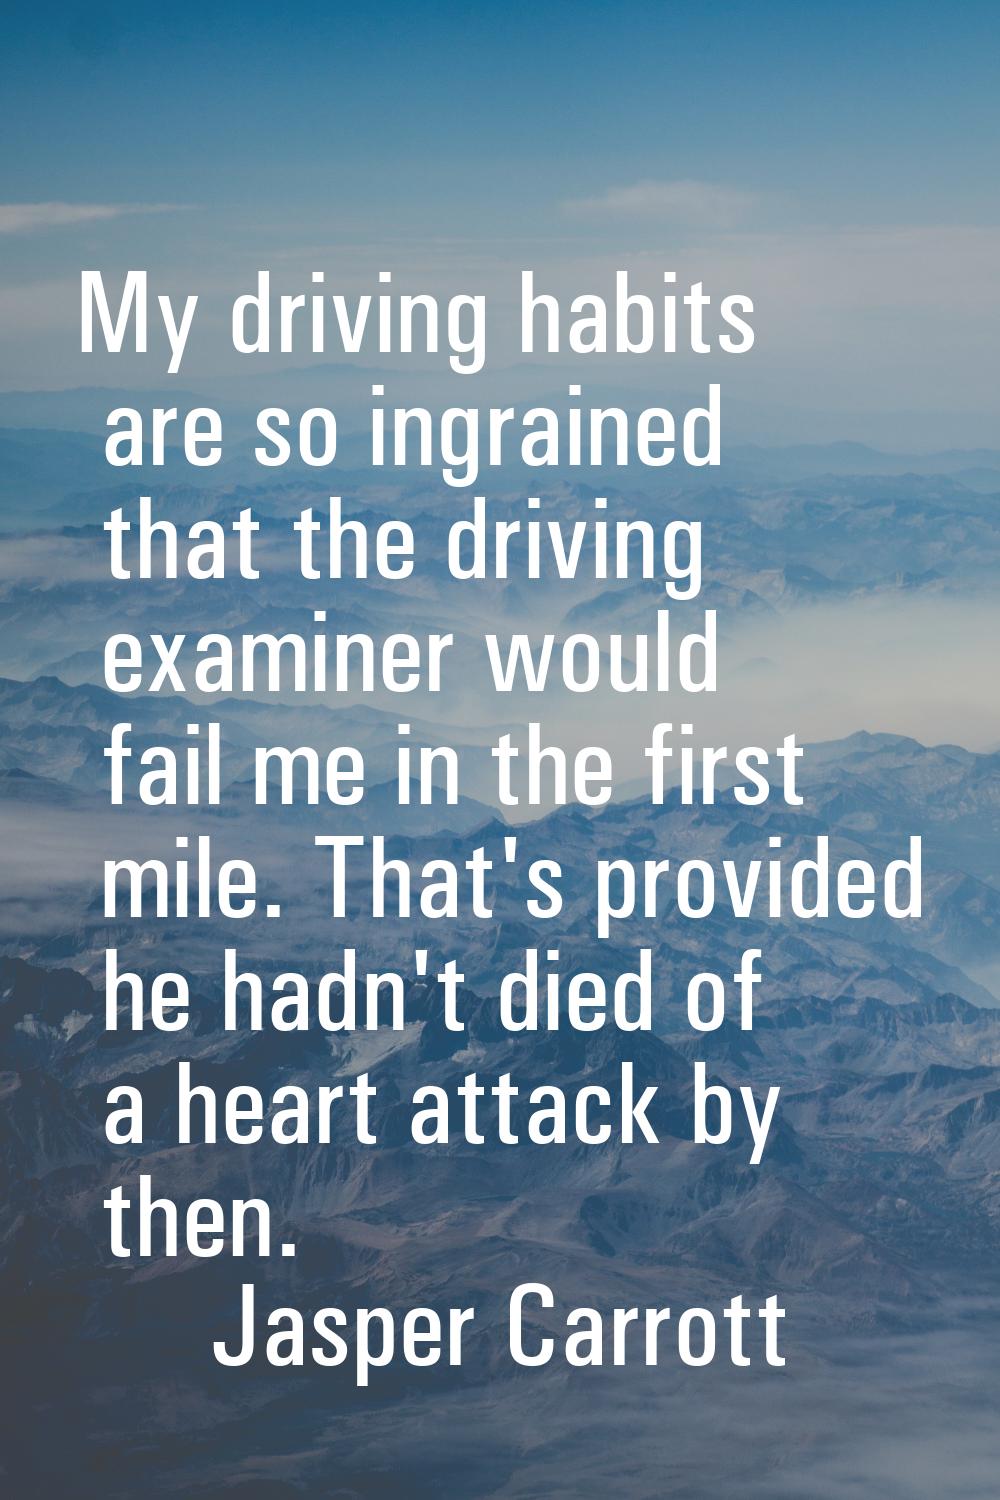 My driving habits are so ingrained that the driving examiner would fail me in the first mile. That'